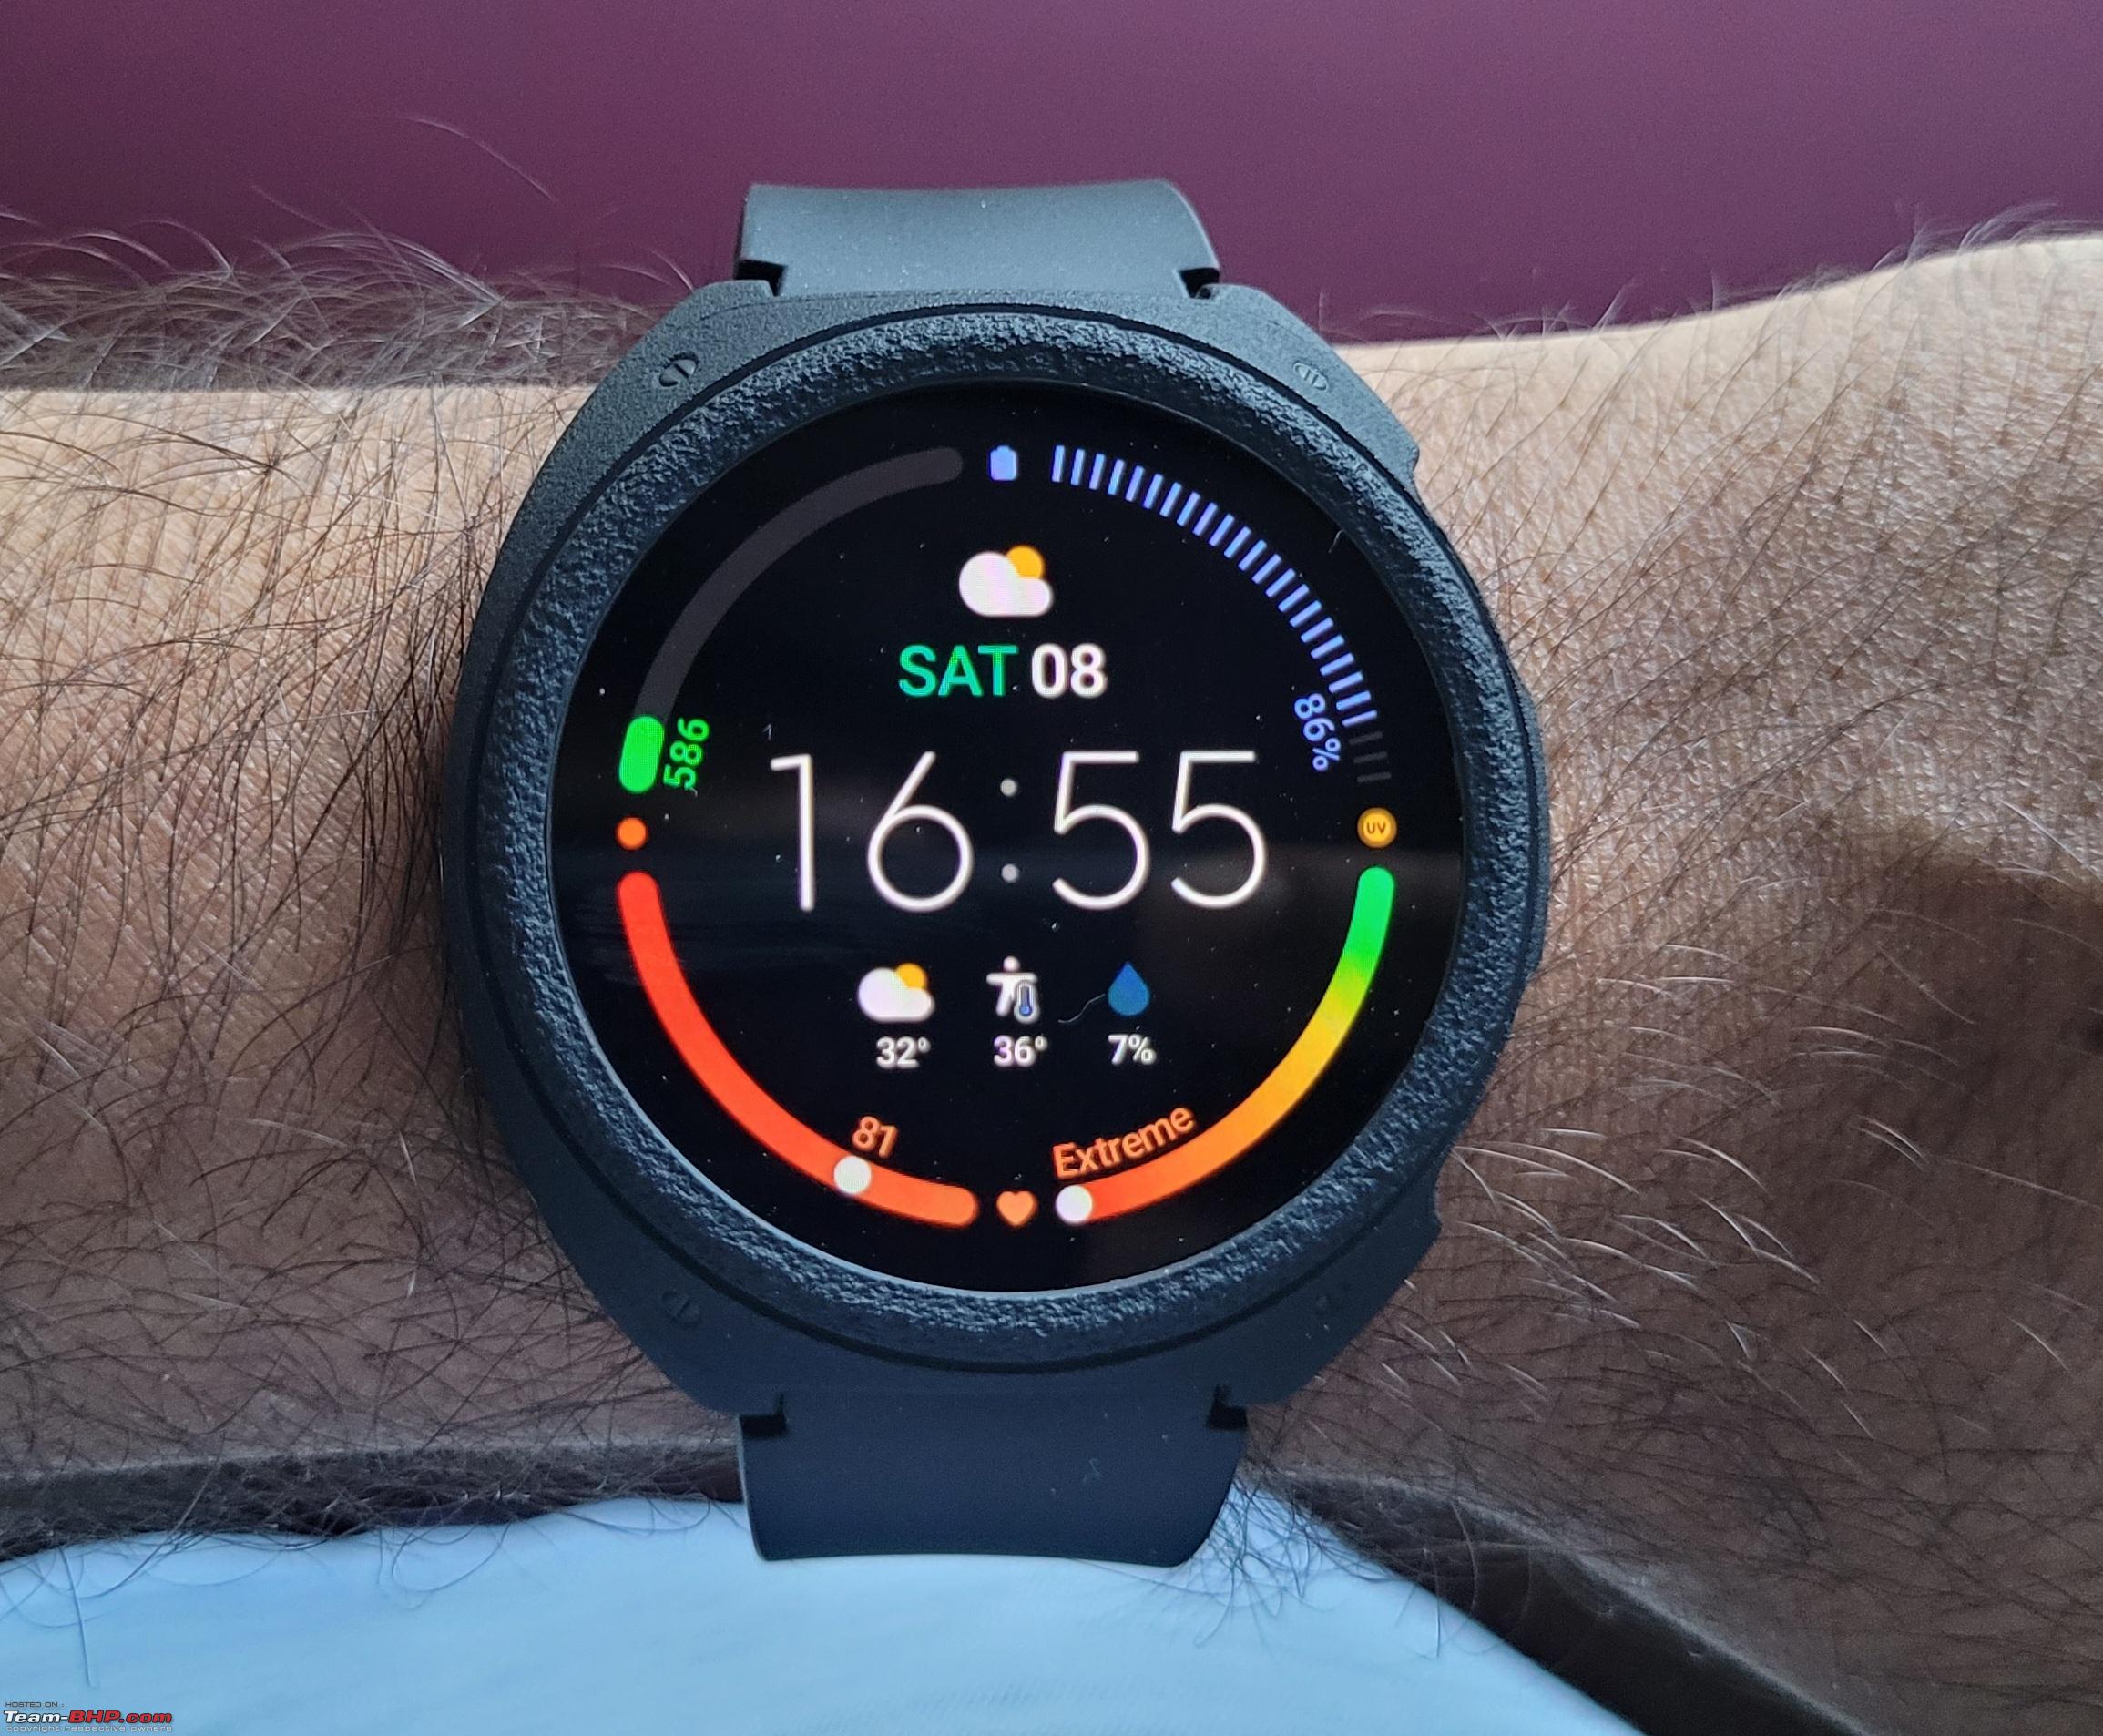 Amazfit T-Rex Pro review: This fitness watch is in a league of its own